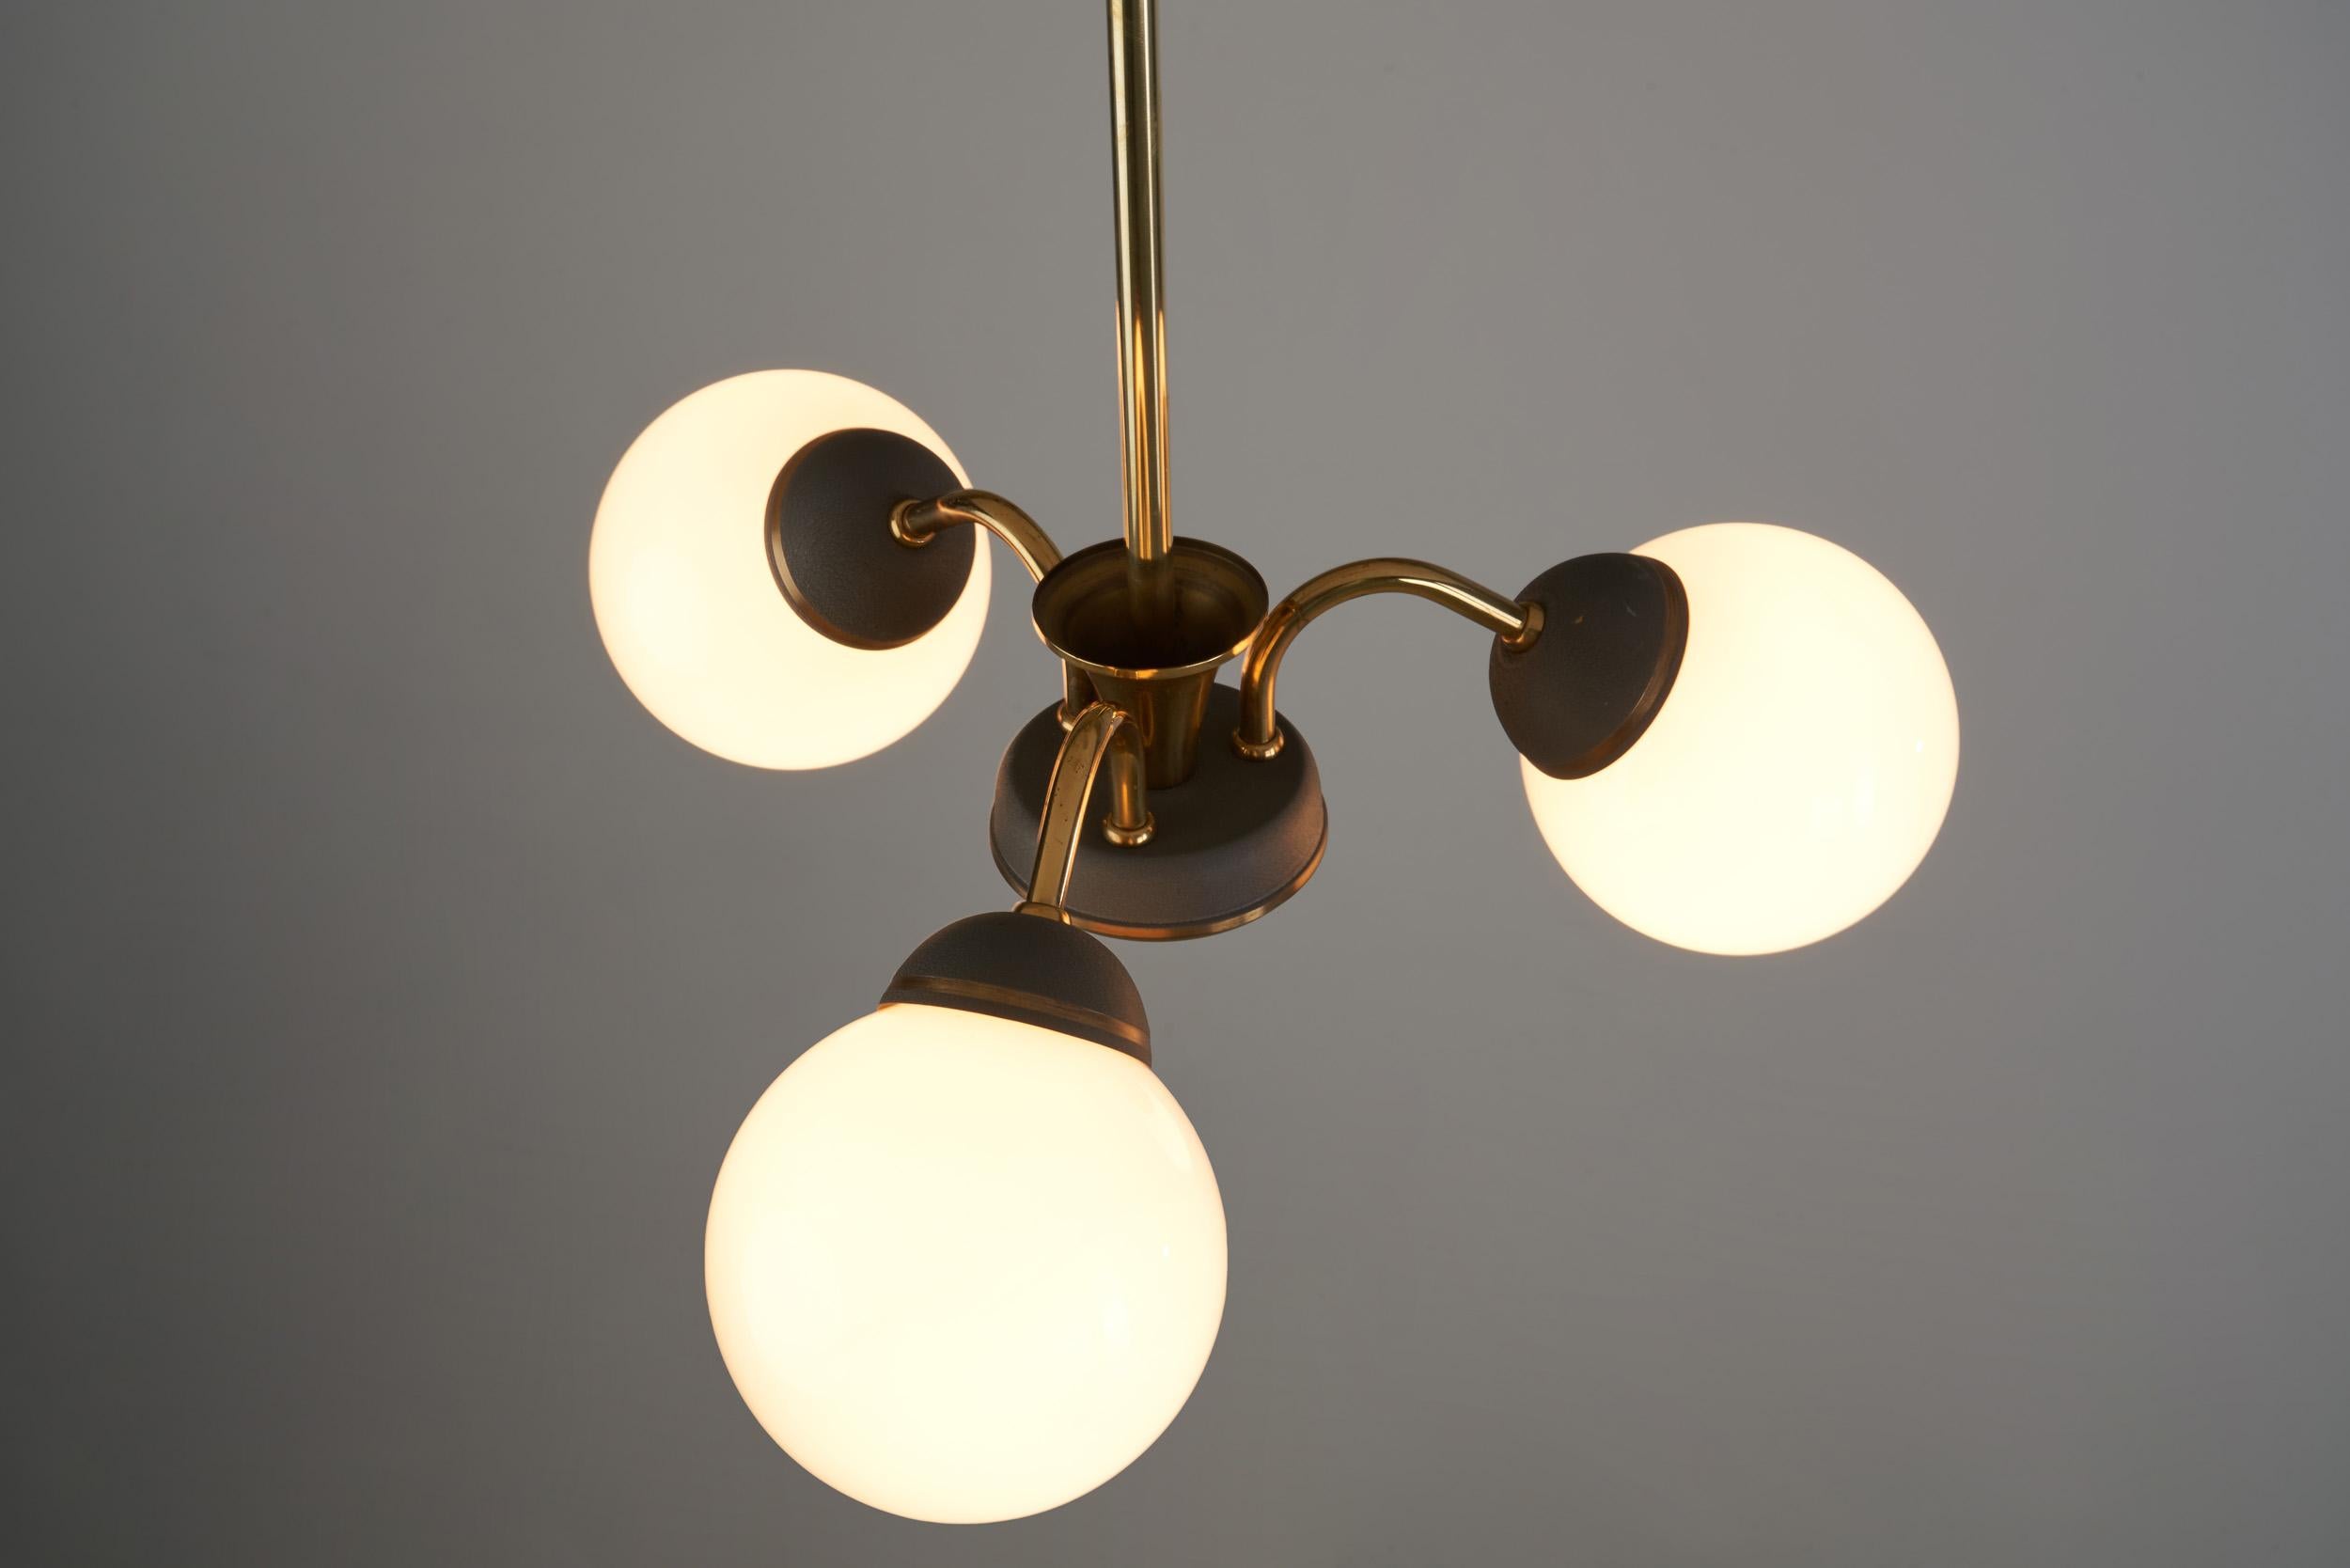 Brass Three-Armed Ceiling Lamp with Opal Glass Shades, Scandinavia 1950s For Sale 4